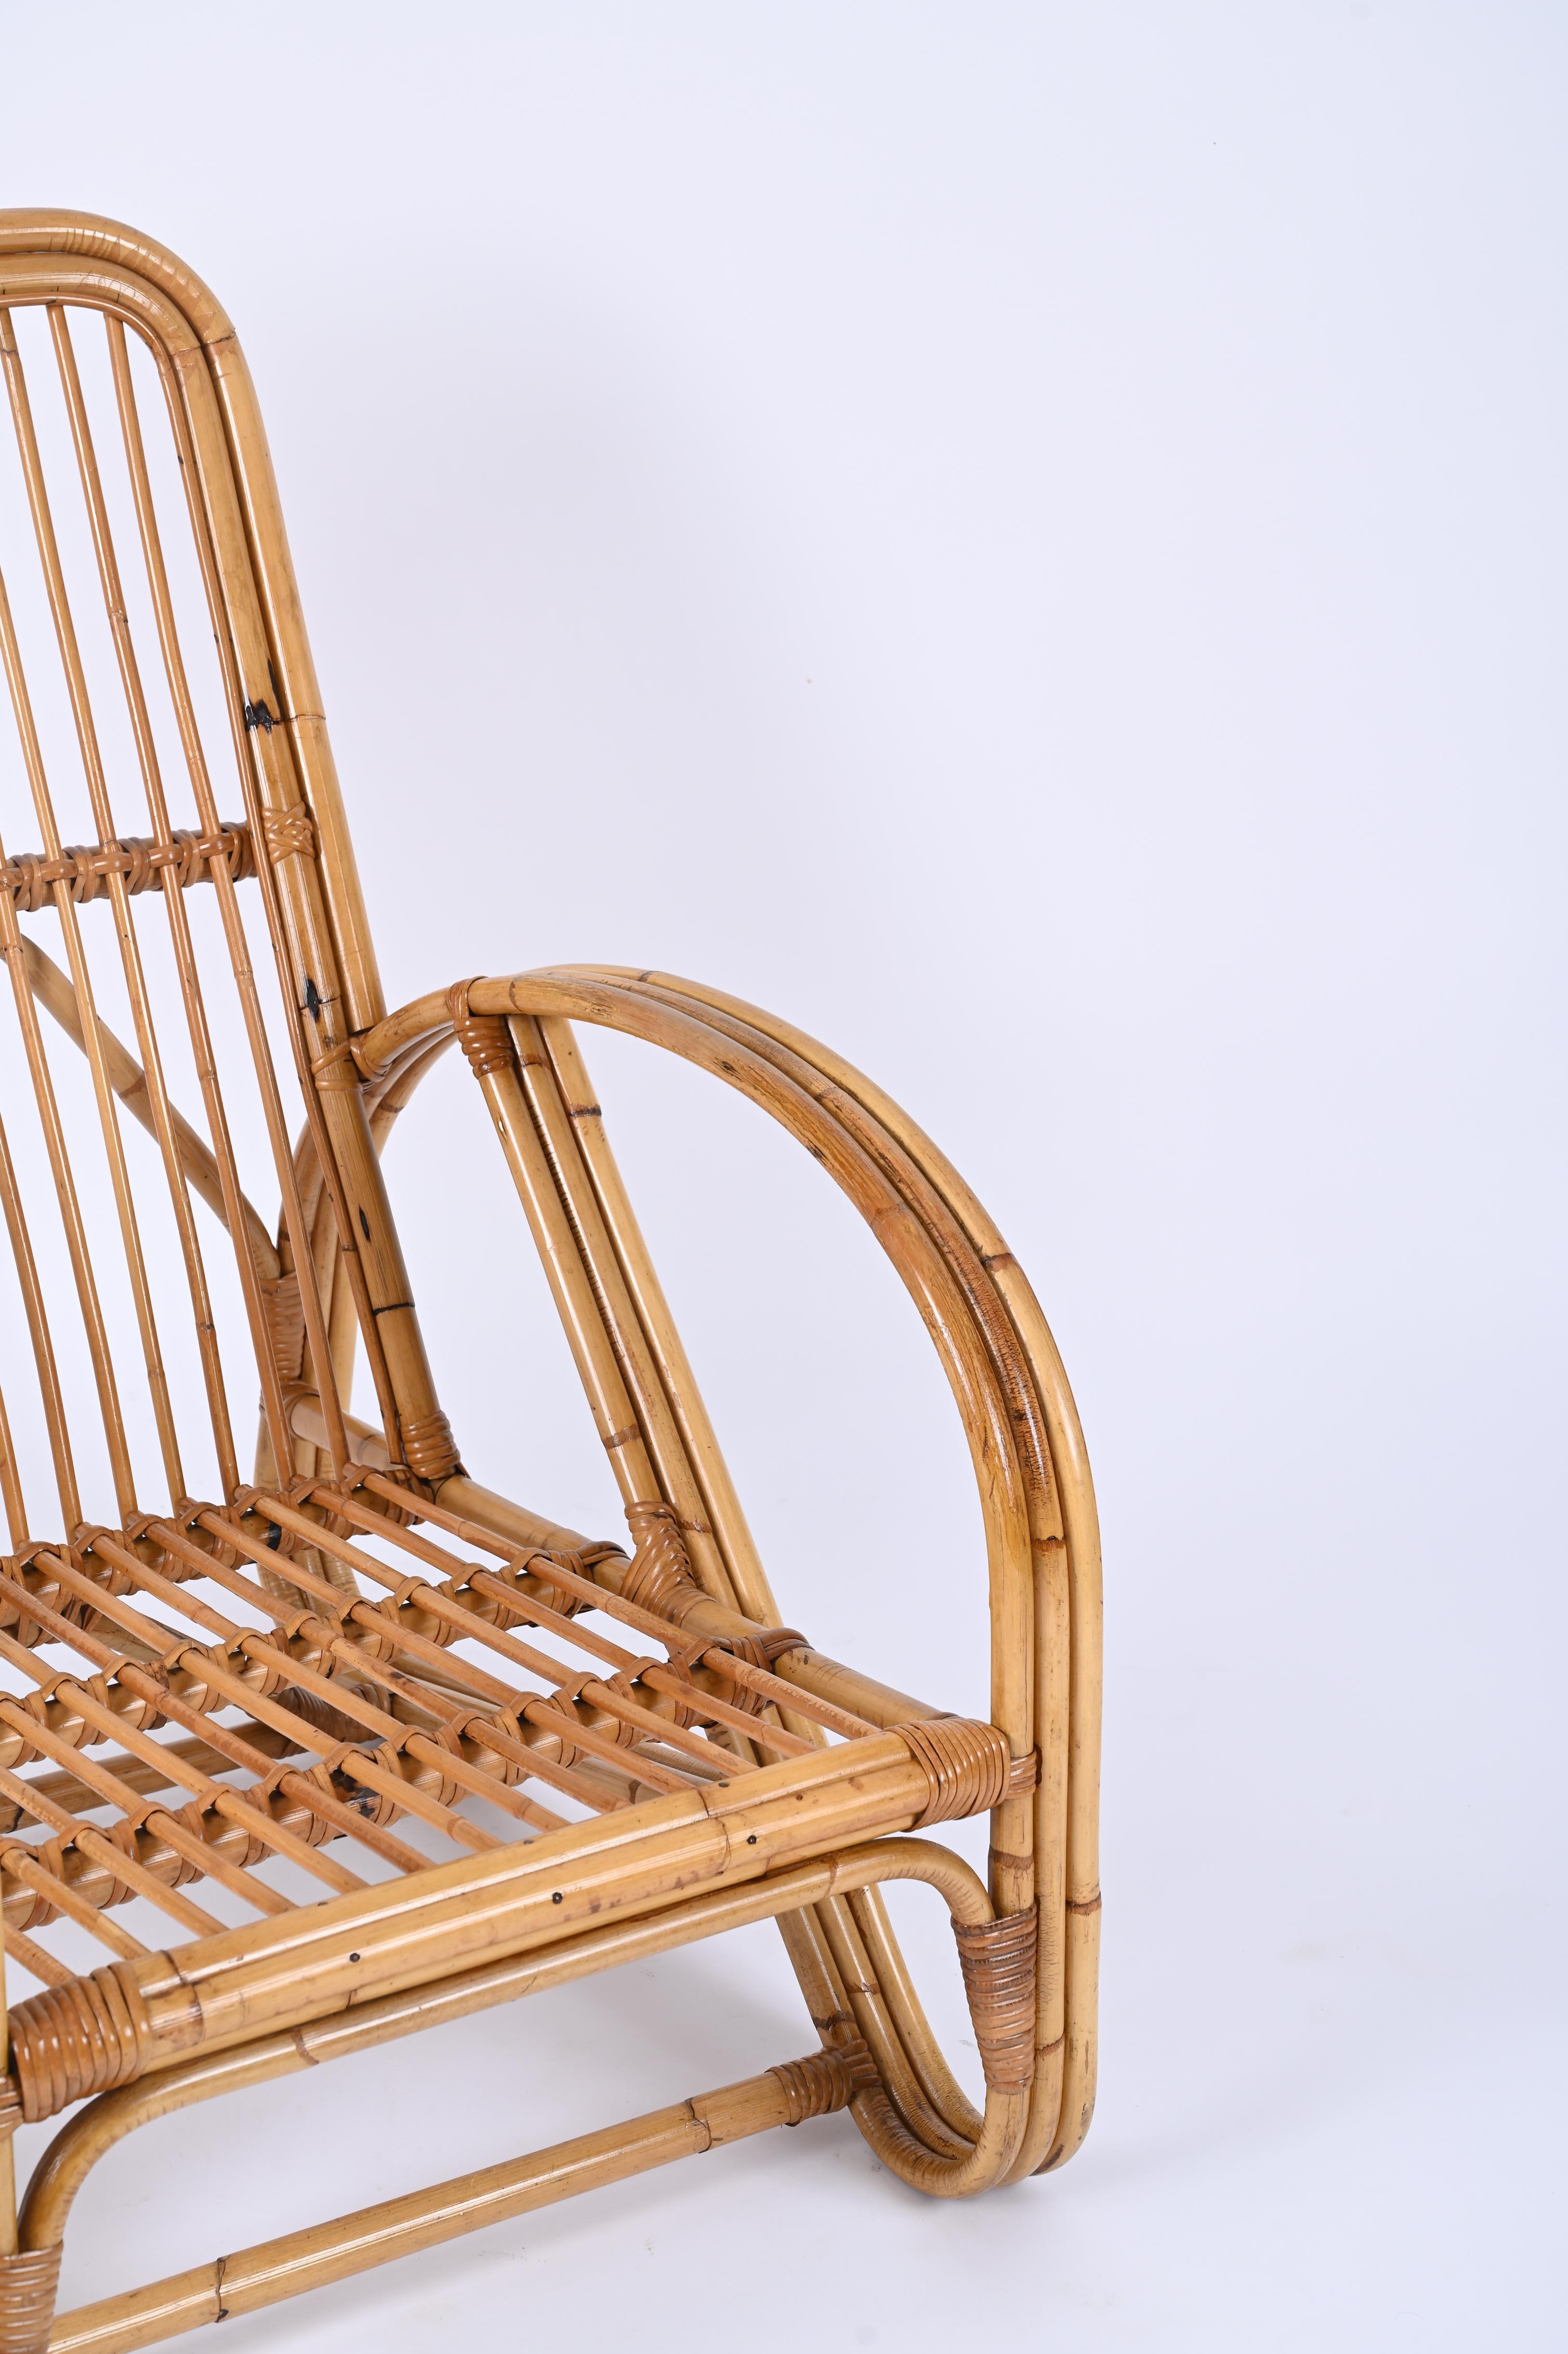 Hand-Woven Vivai del Sud Mid-Century Italian Bamboo and Rattan Armchair, Italy 1970s For Sale